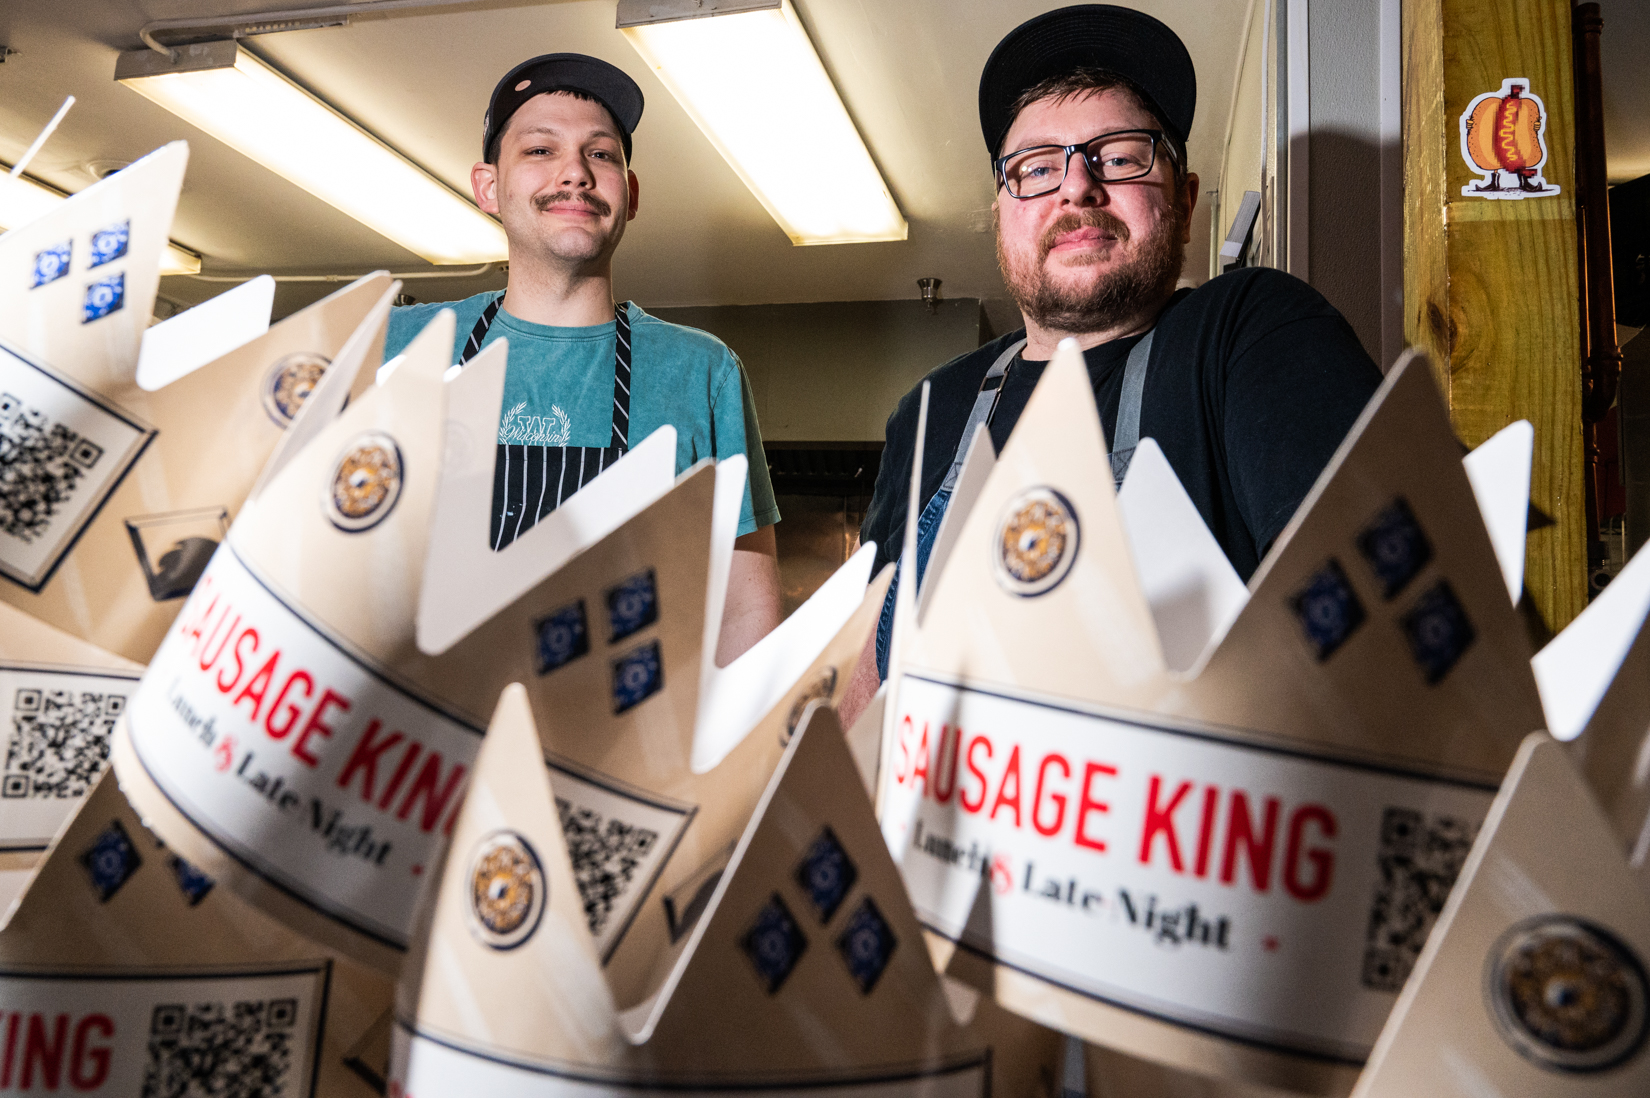 Drunk Sex Orgy Business Classy - Drunk Eats' Spot Sausage King Opens In Logan Square With Lots Of Dirty  Jokes For Late-Night Crowd